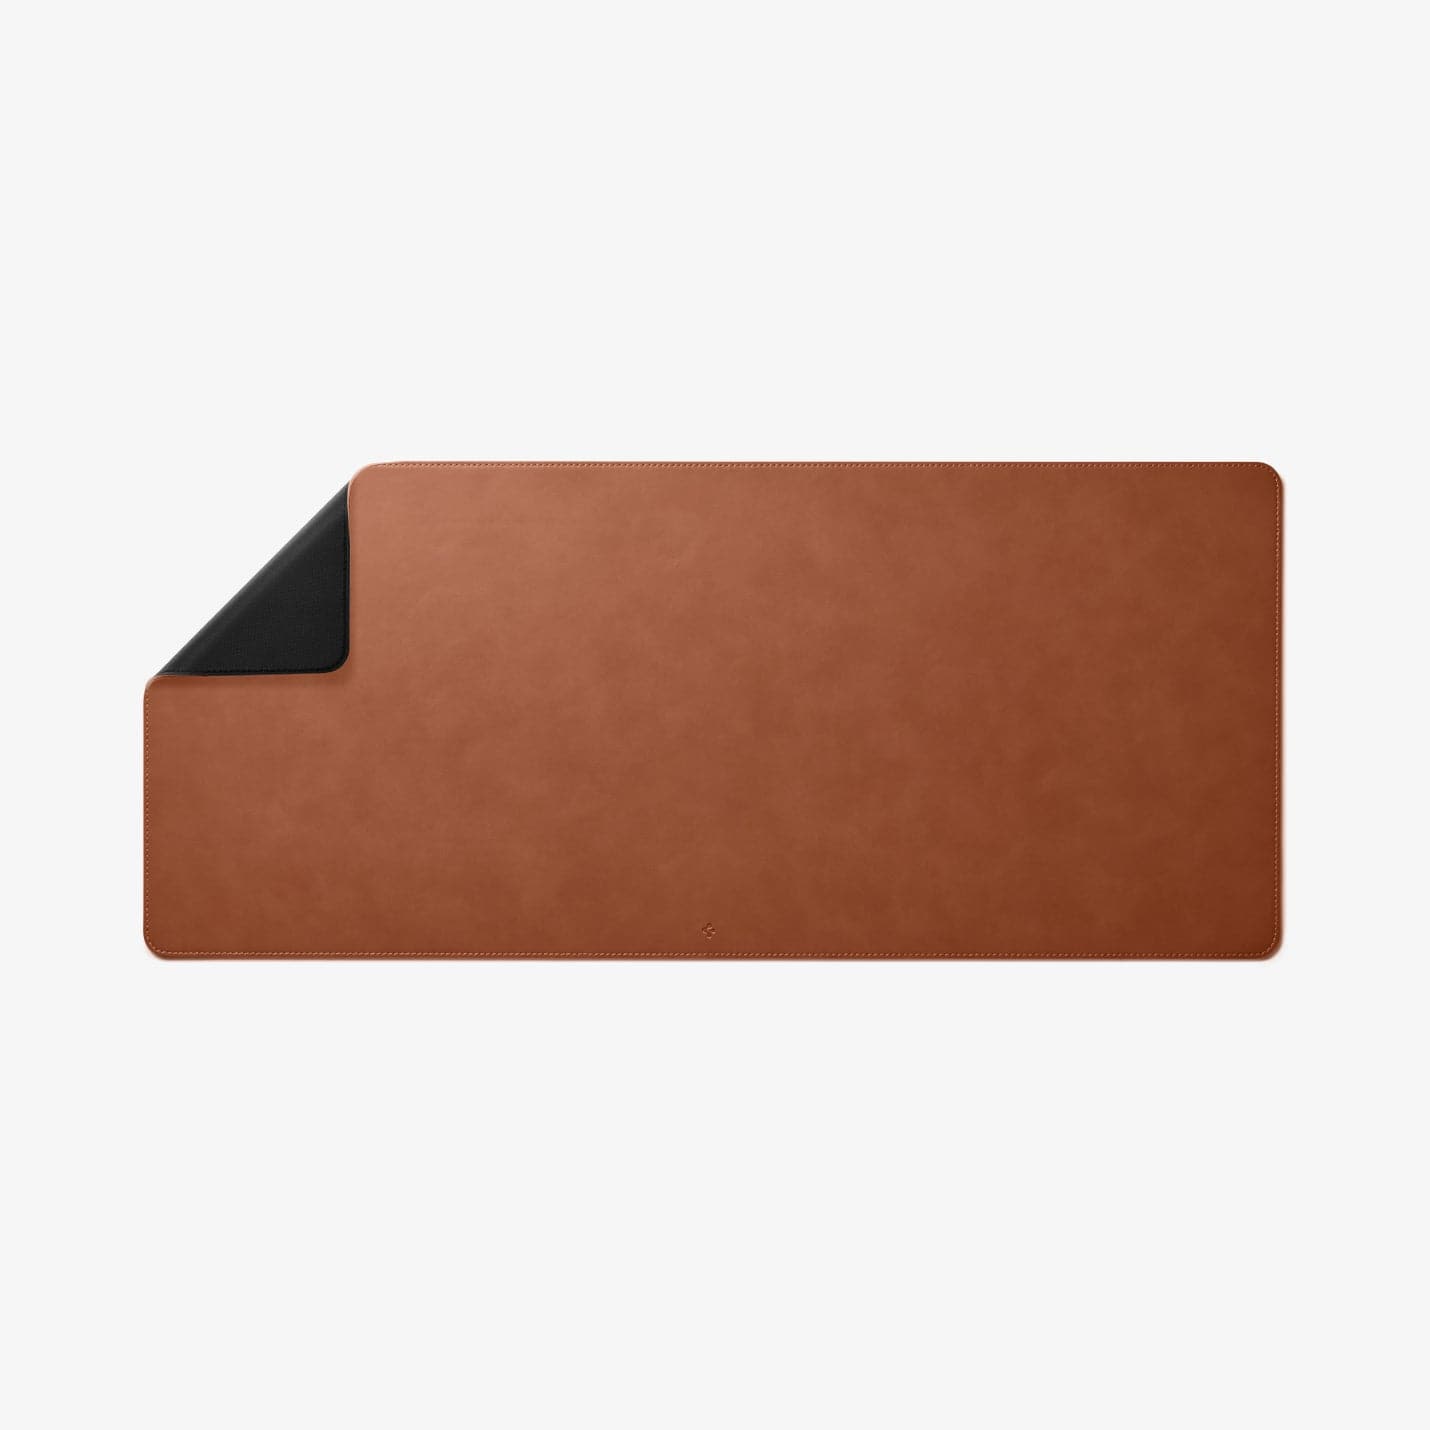 APP04763 - LD302 Desk Pad in brown showing the front with the top left bending slightly